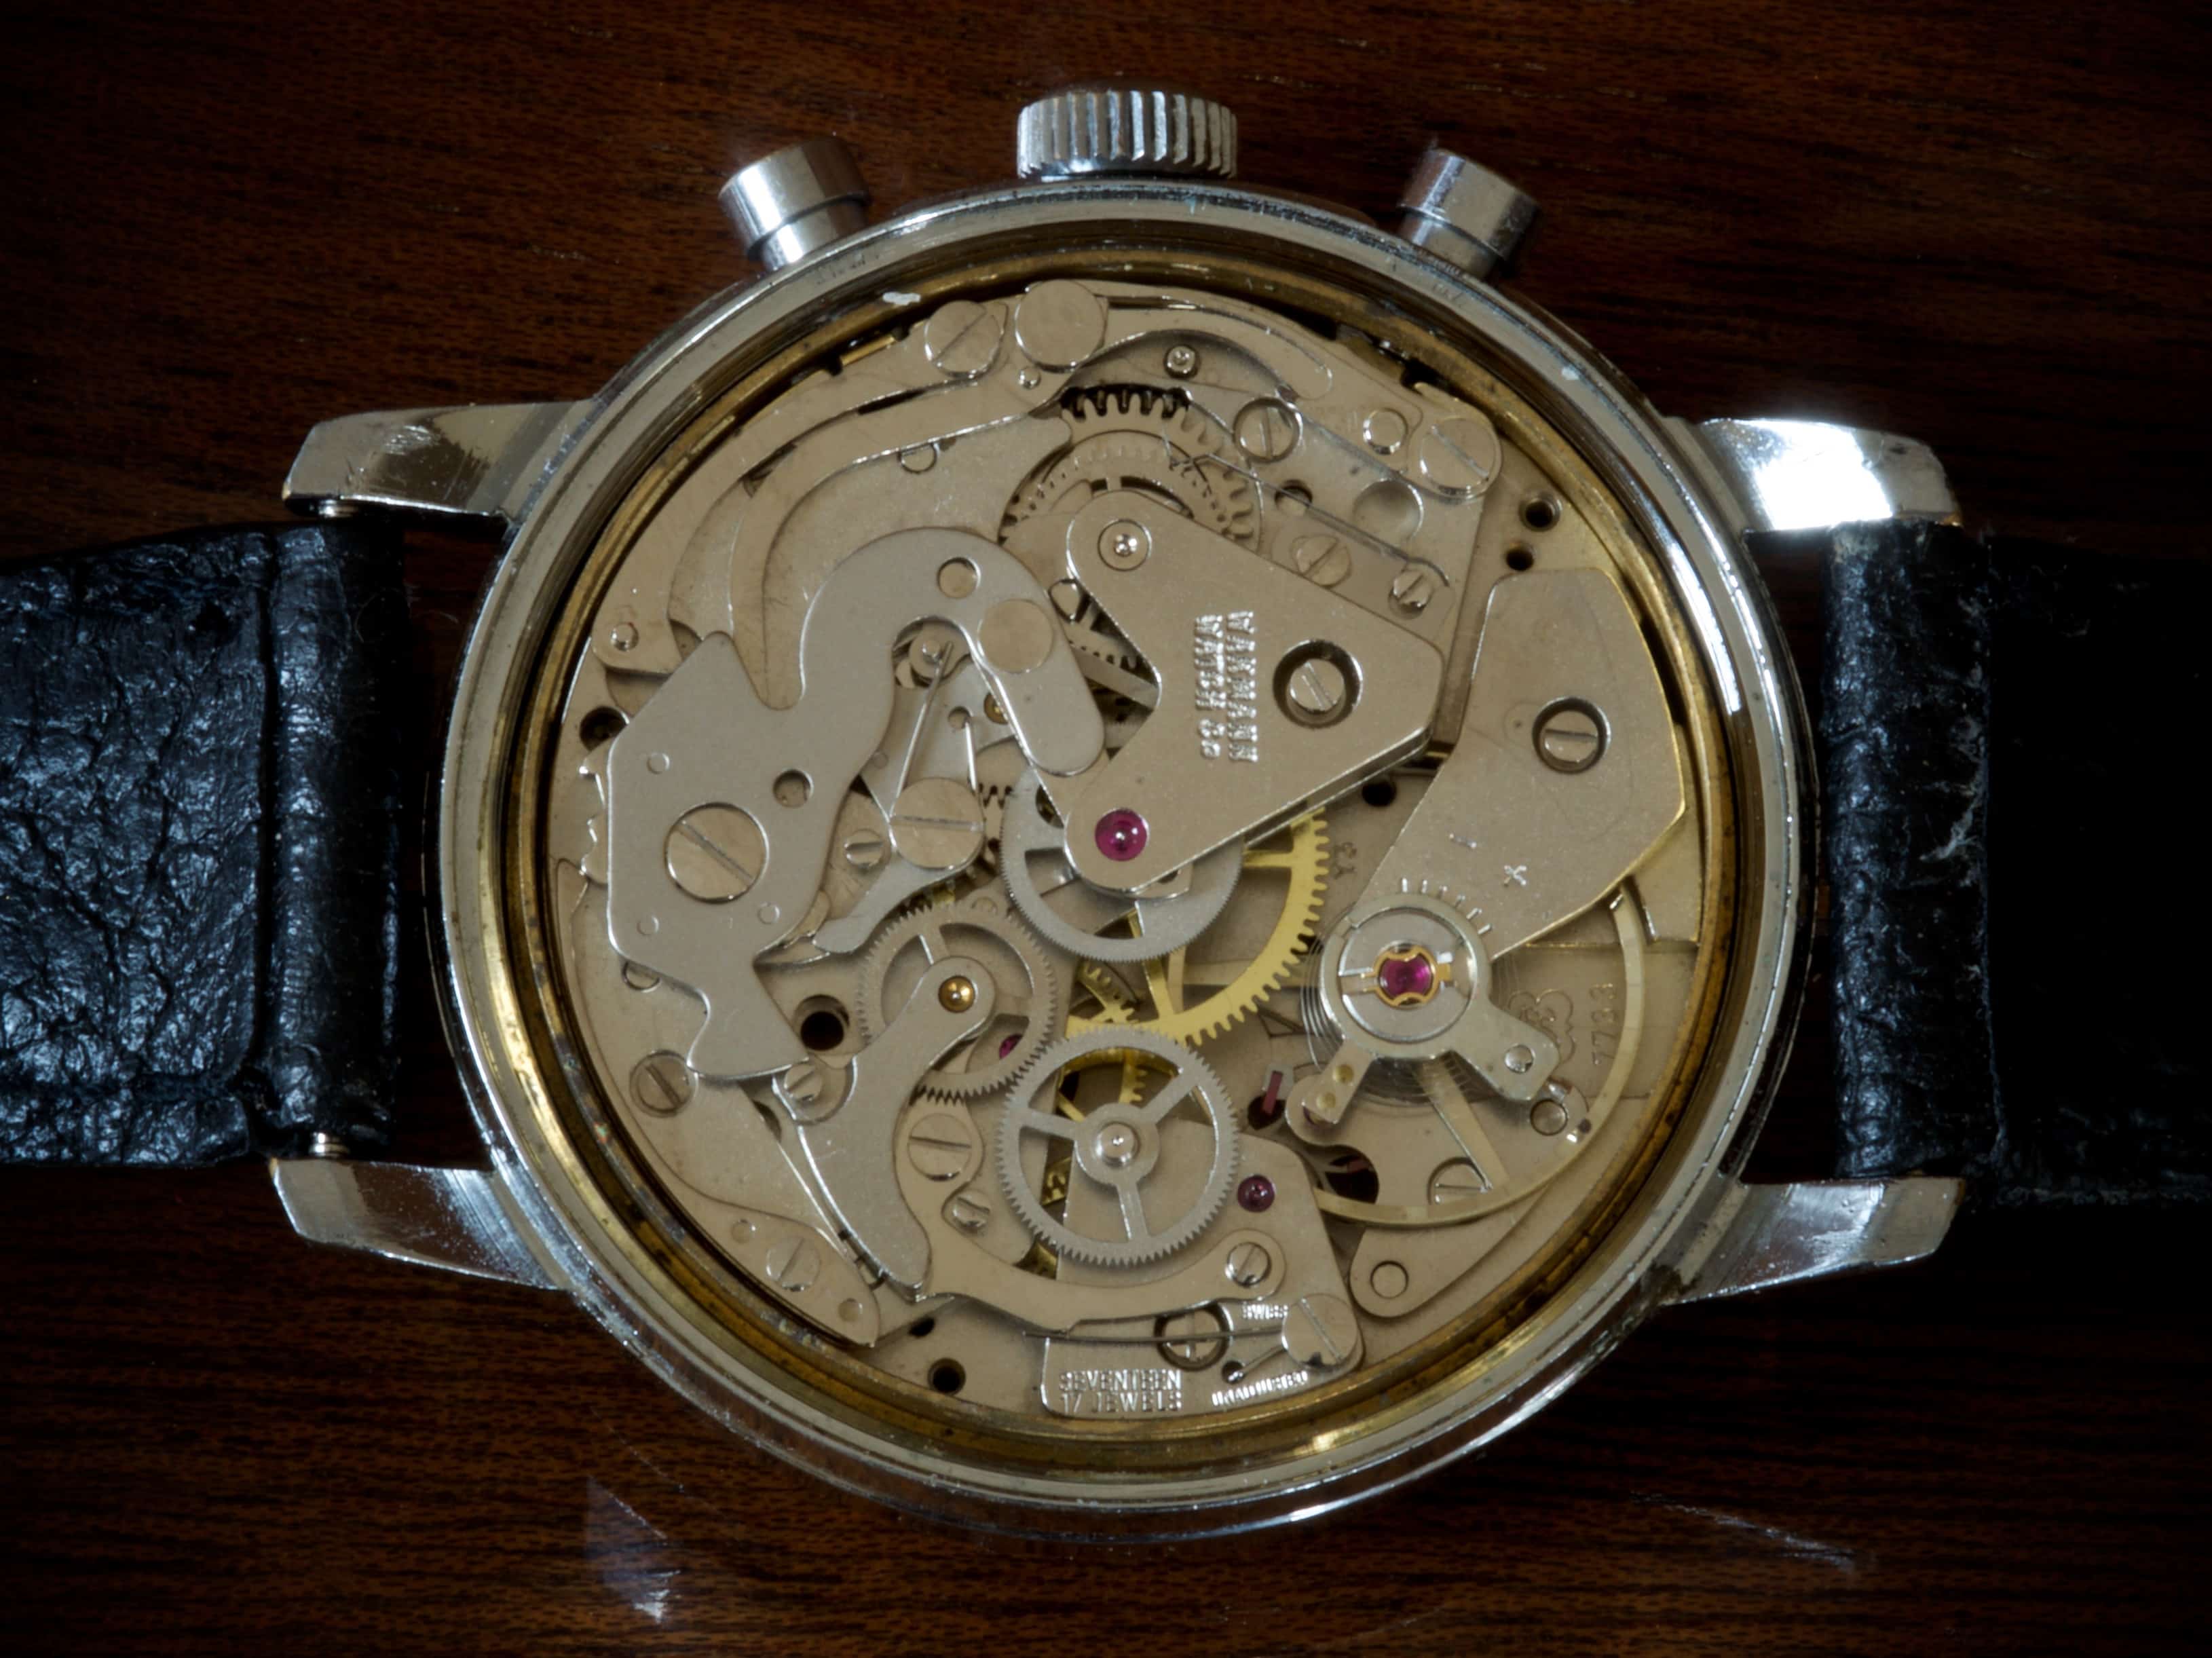 Chronography 13: The Important History of the Valjoux 7730, a Classic Mid-Century Movement